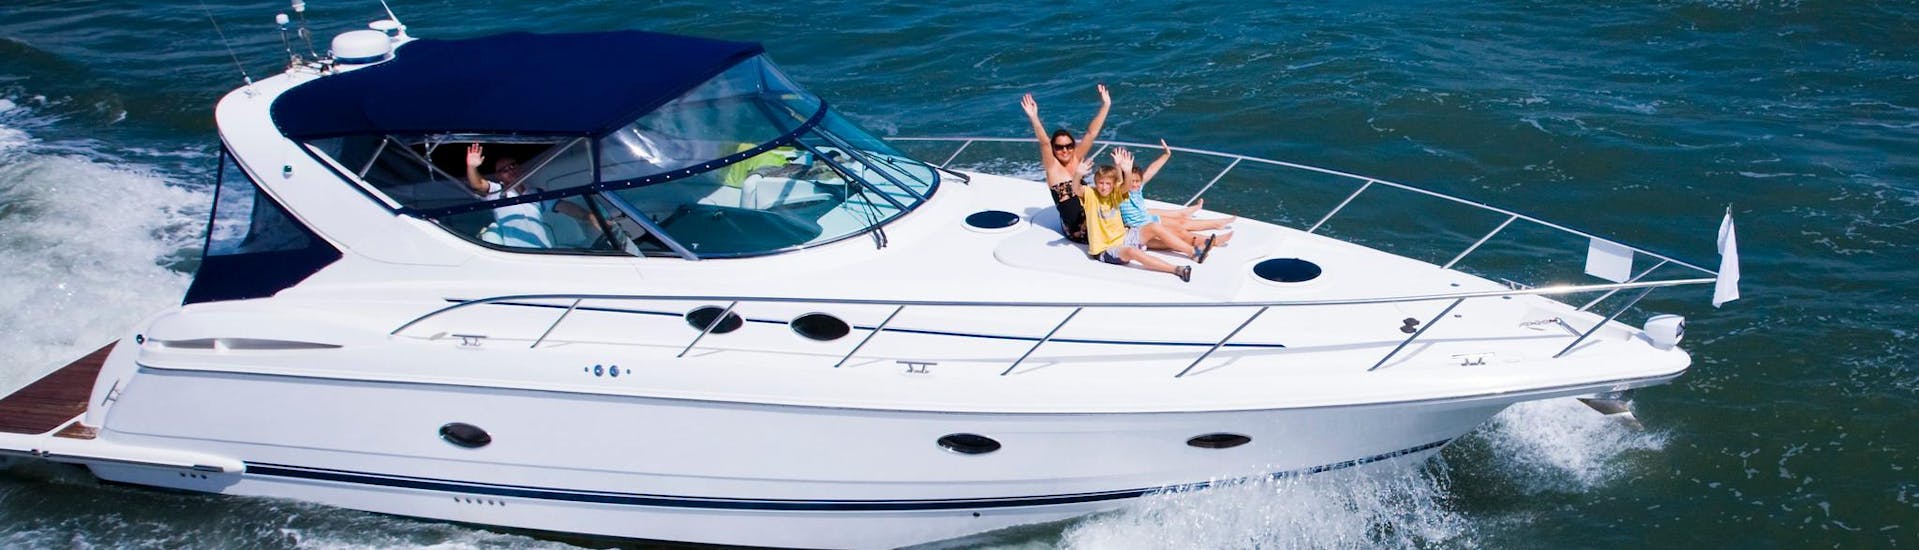  Mother and two children having fun during a yacht trip